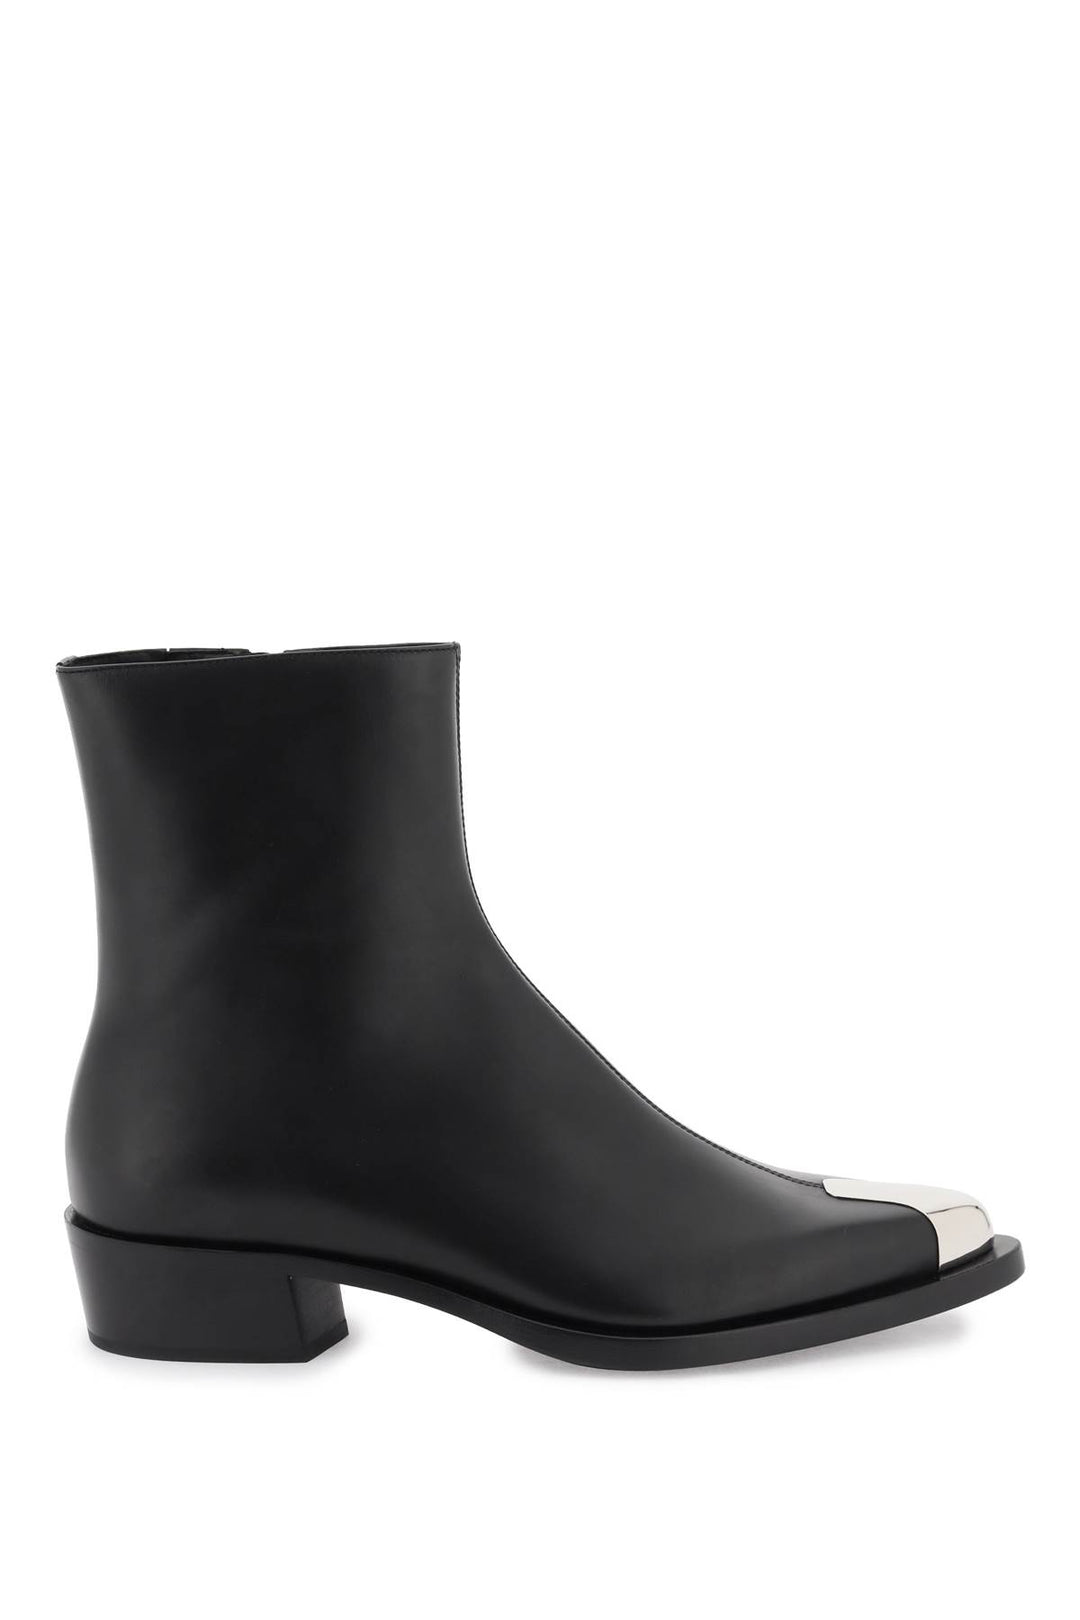 Alexander Mcqueen Leather Punk Ankle Boots   Nero